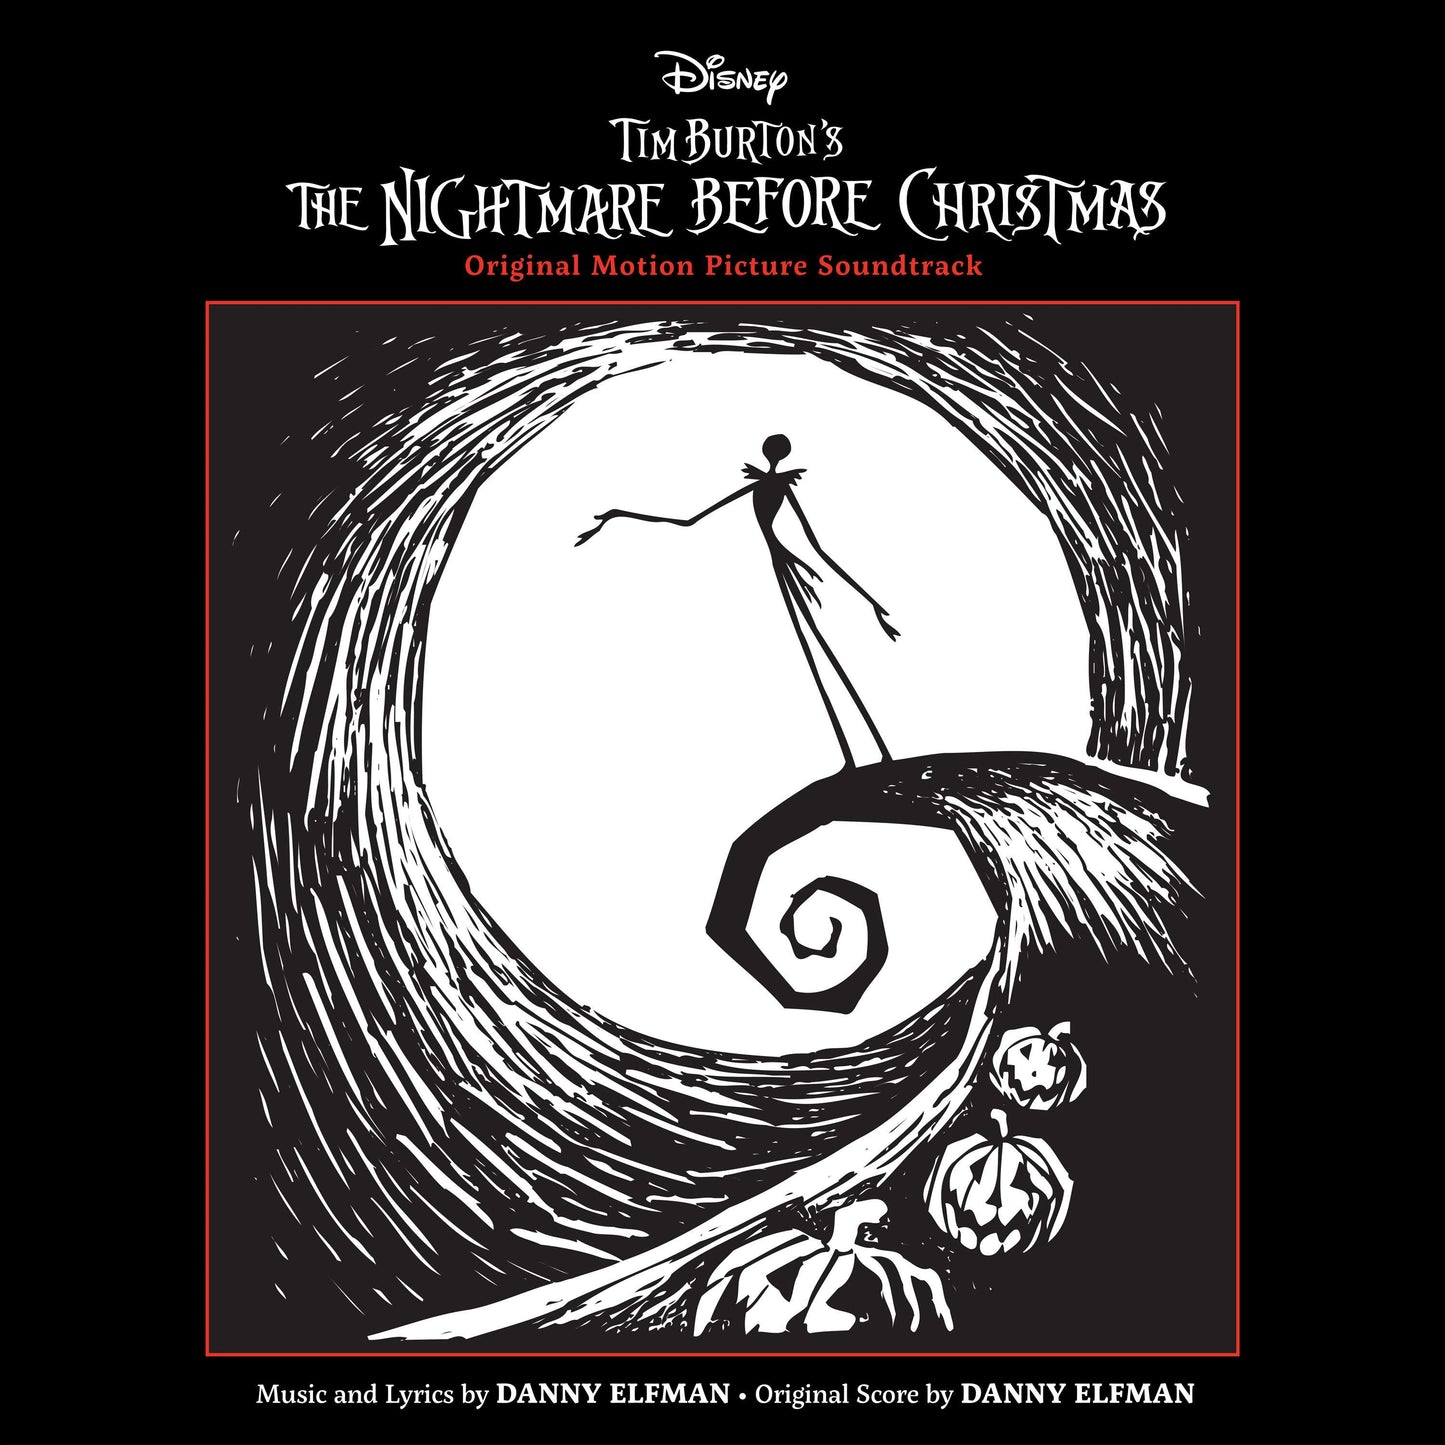 V/A "The Nightmare Before Christmas (Original Motion Picture Soundtrack)" 2xLP (Zoetrope Picture Disc)